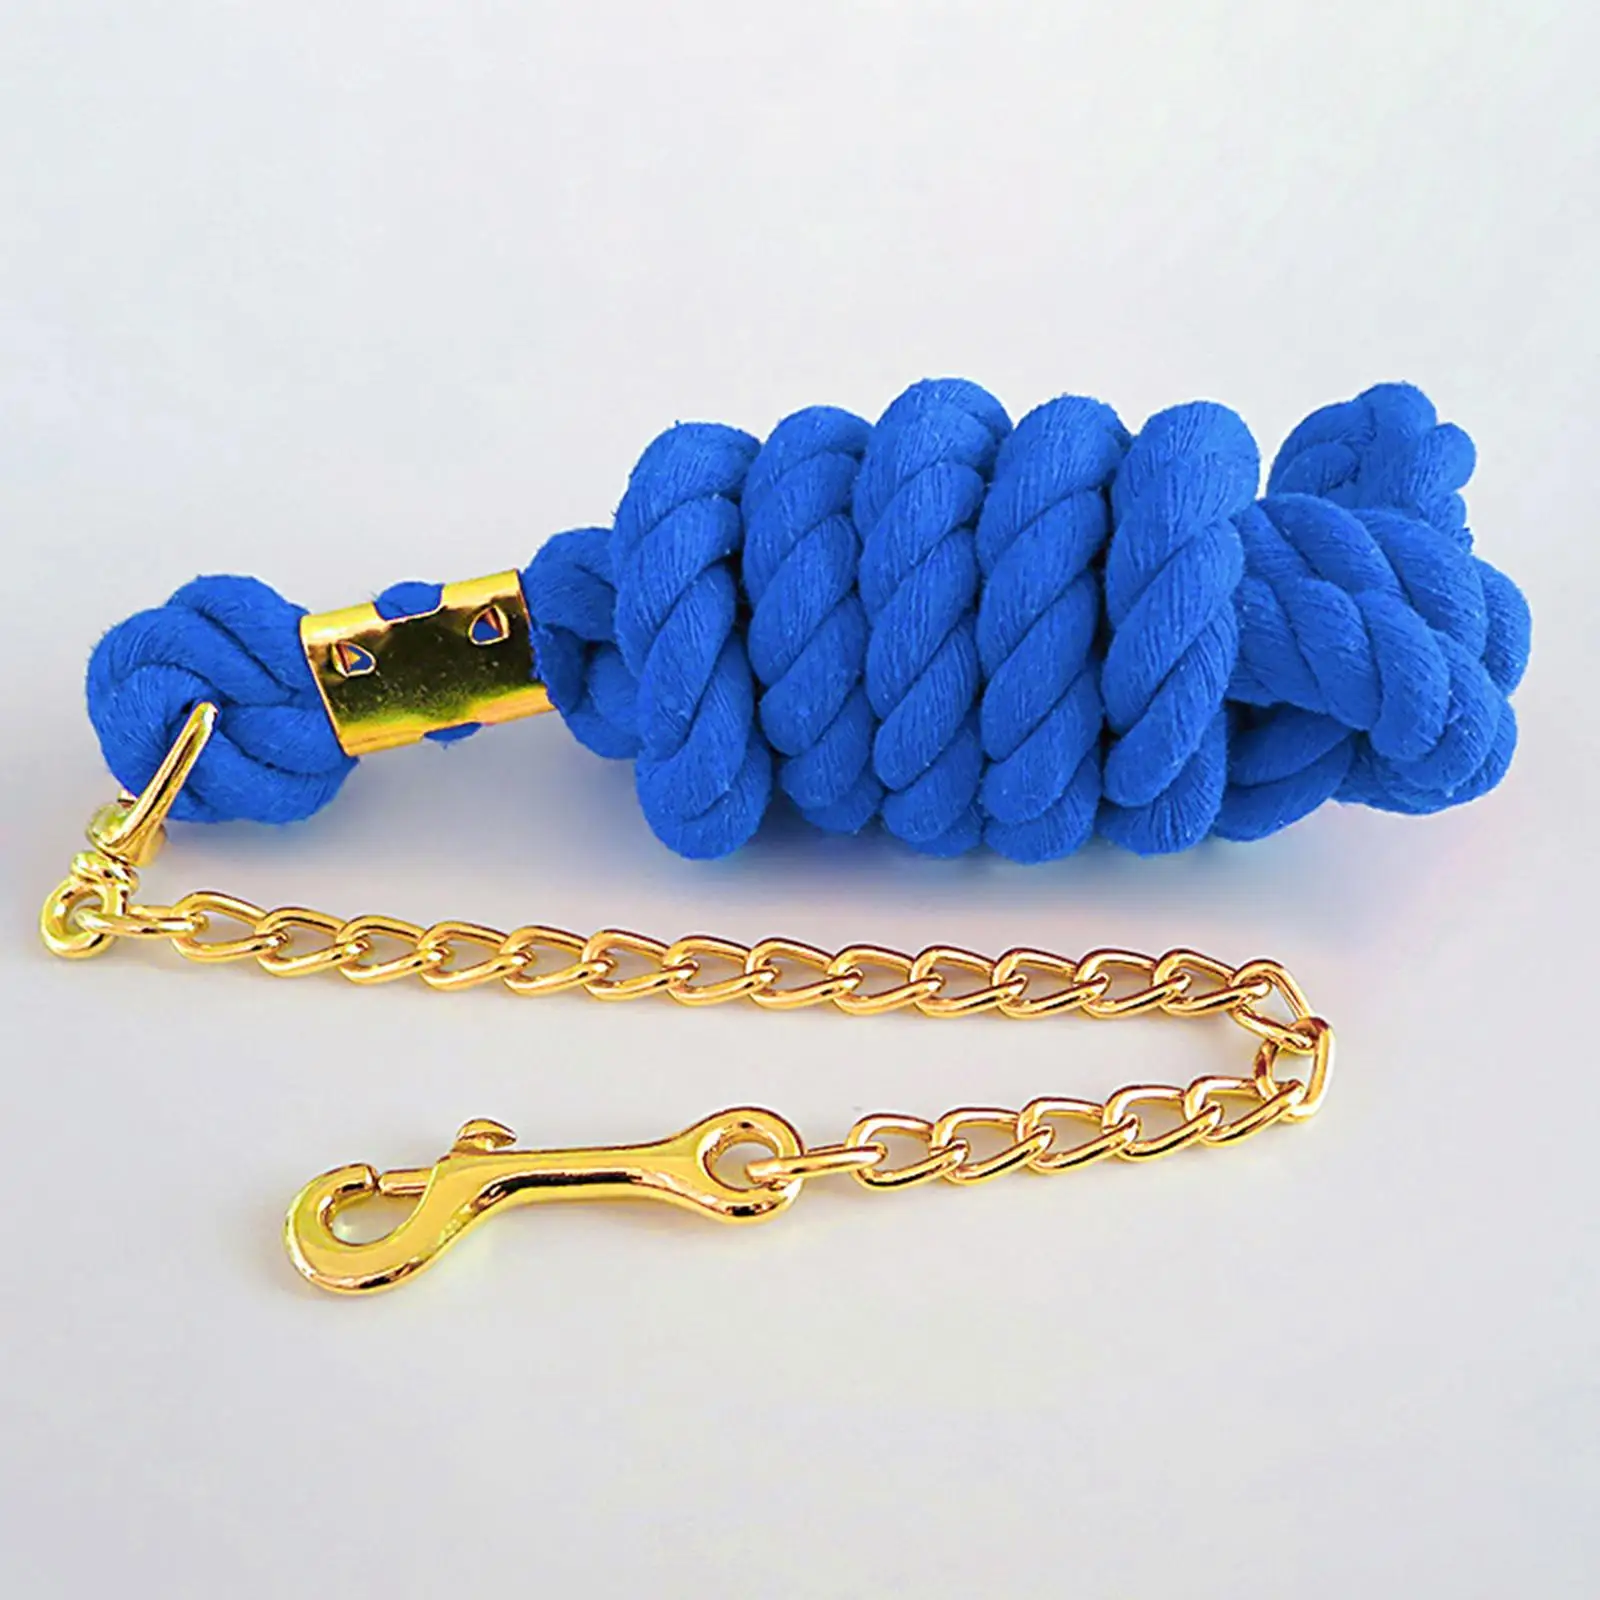 Solid   Leading Rope with Chain Swivel Buckle Bolt Snap Accessory